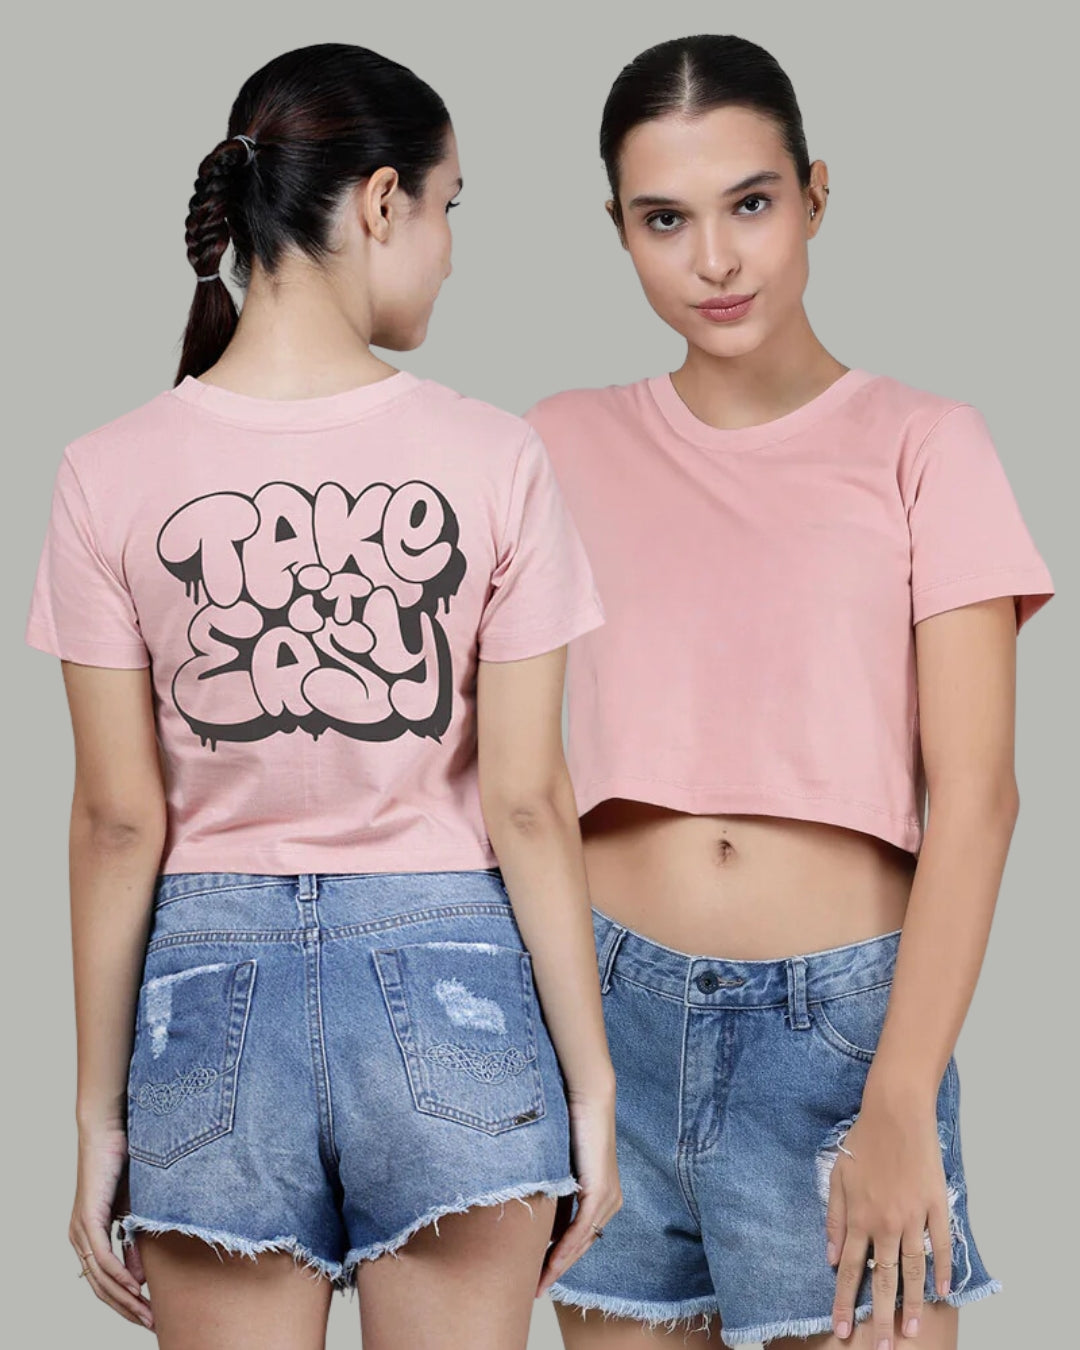 Take It Easy - Crop Top